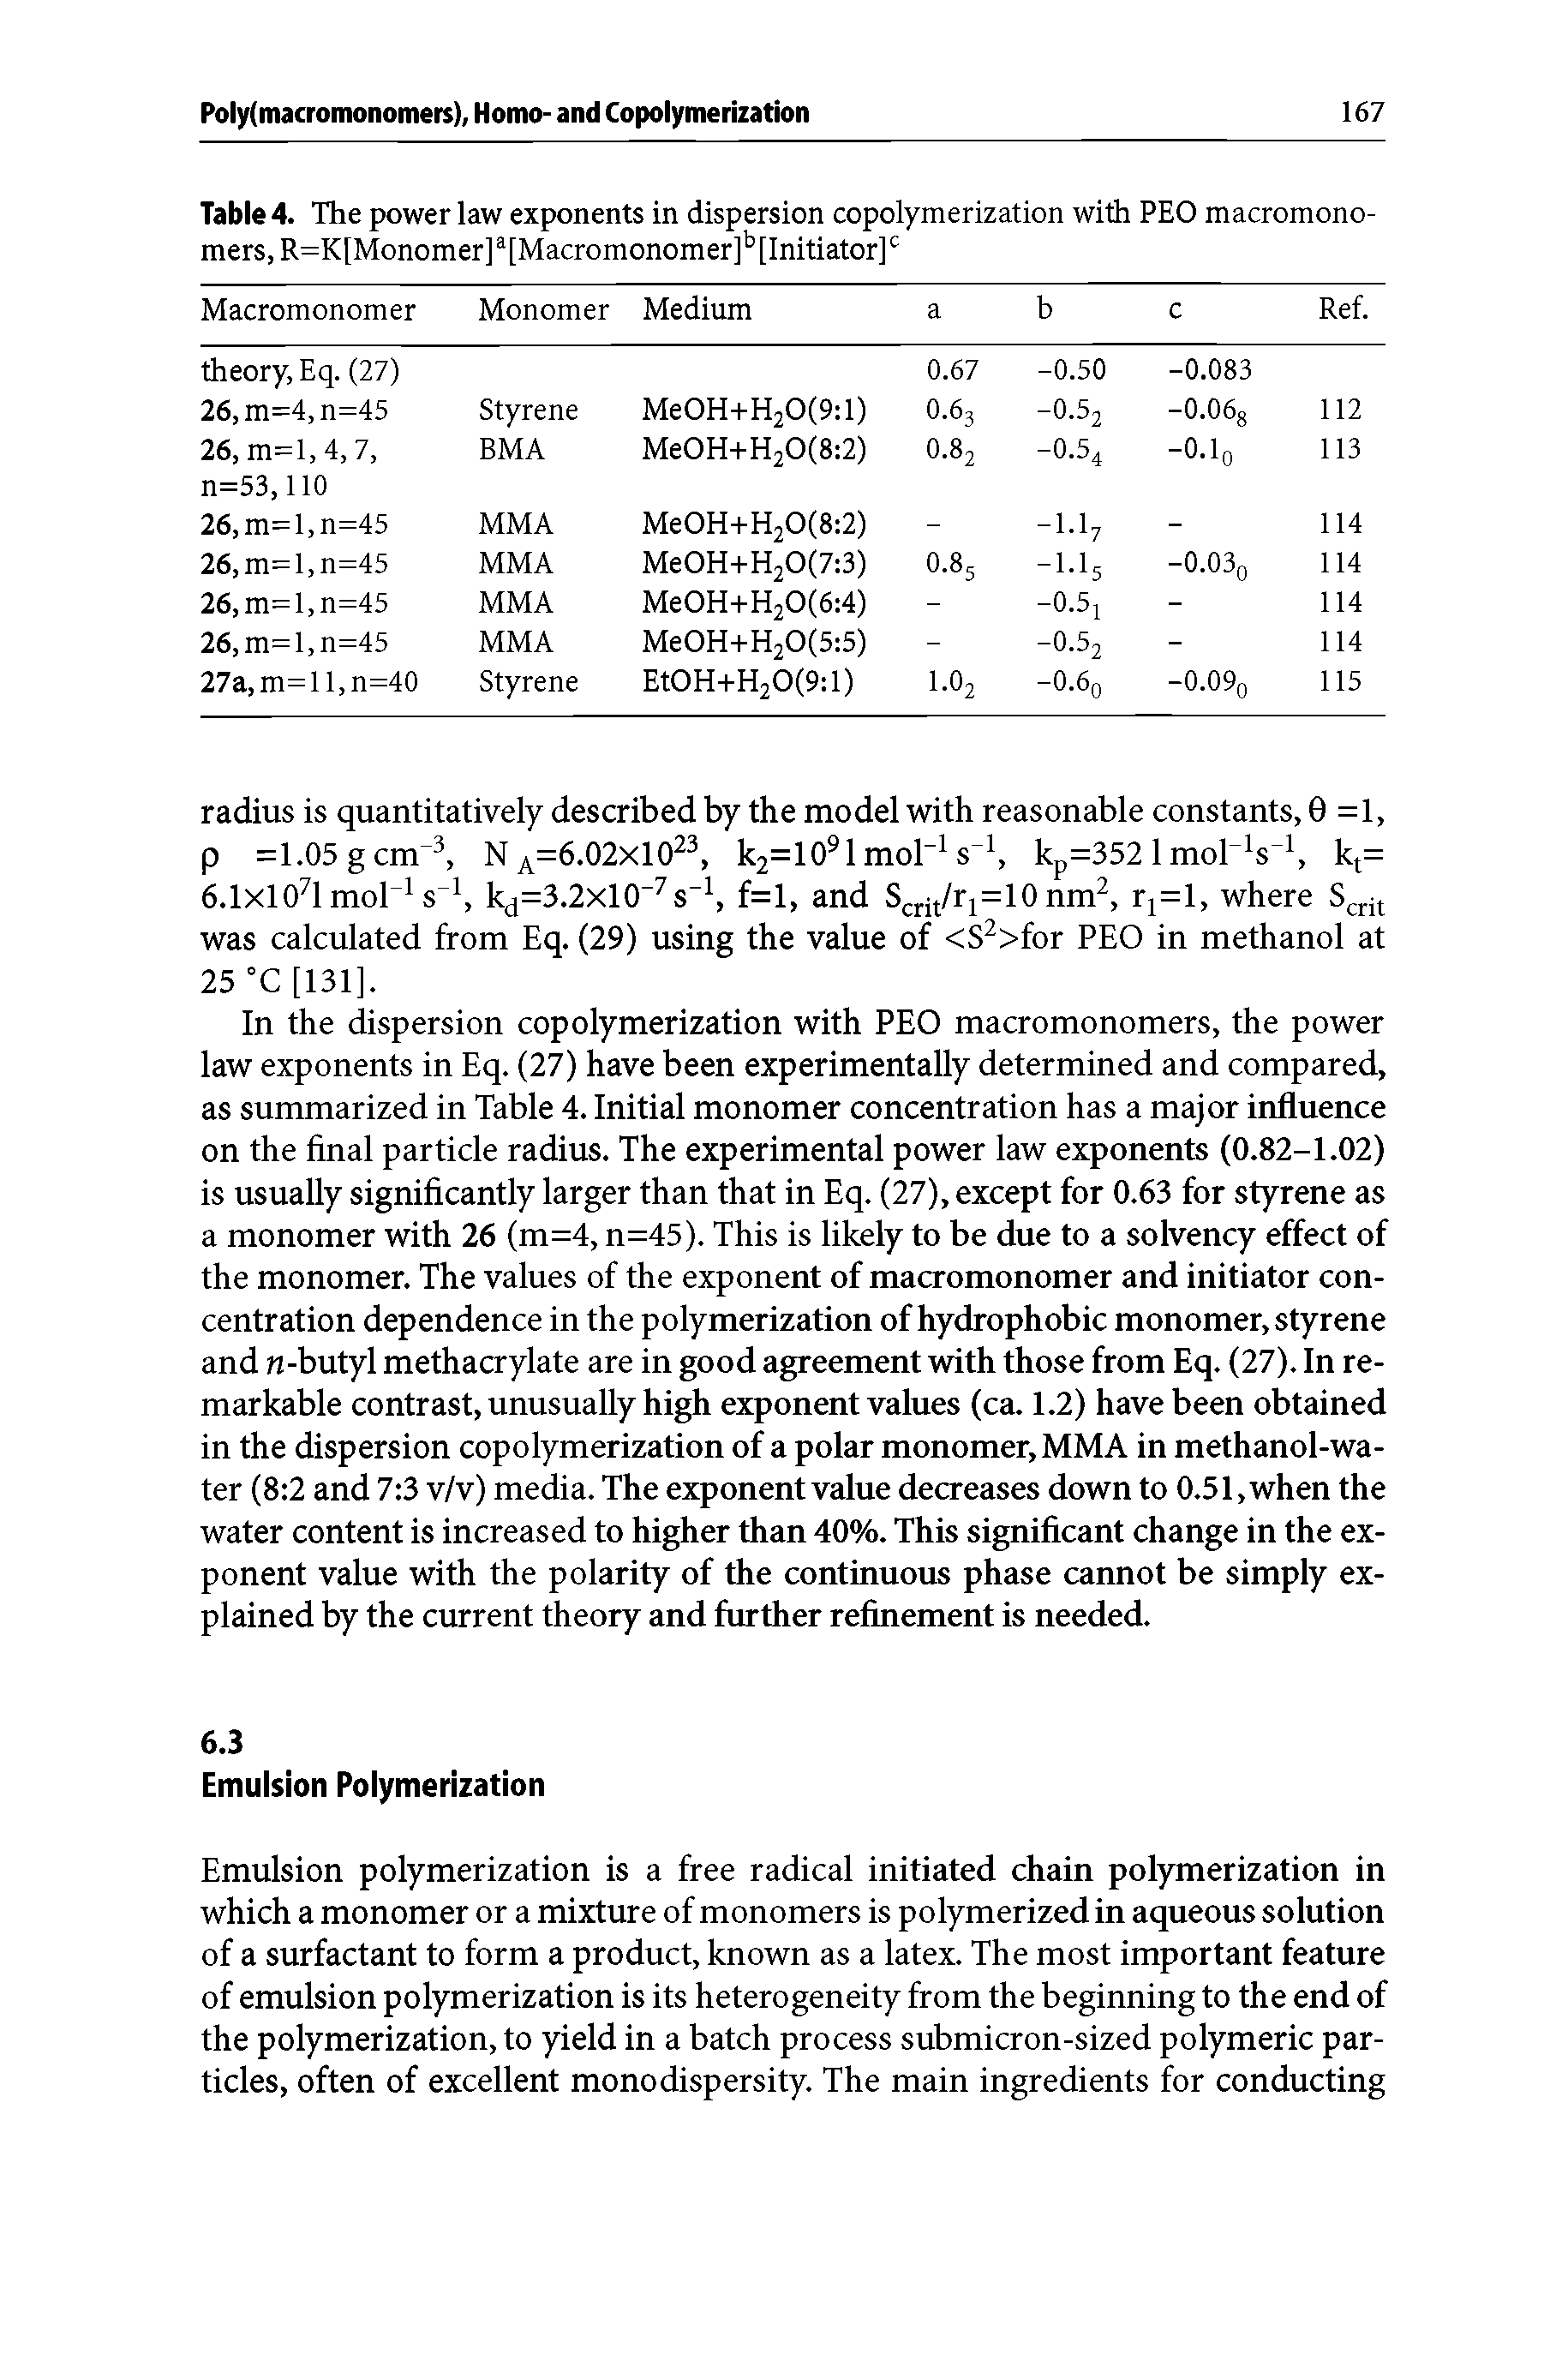 Table 4. The power law exponents in dispersion copolymerization with PEO macromonomers, R=K[Monomer] a[Macromonomer]b [Initiator]c ...